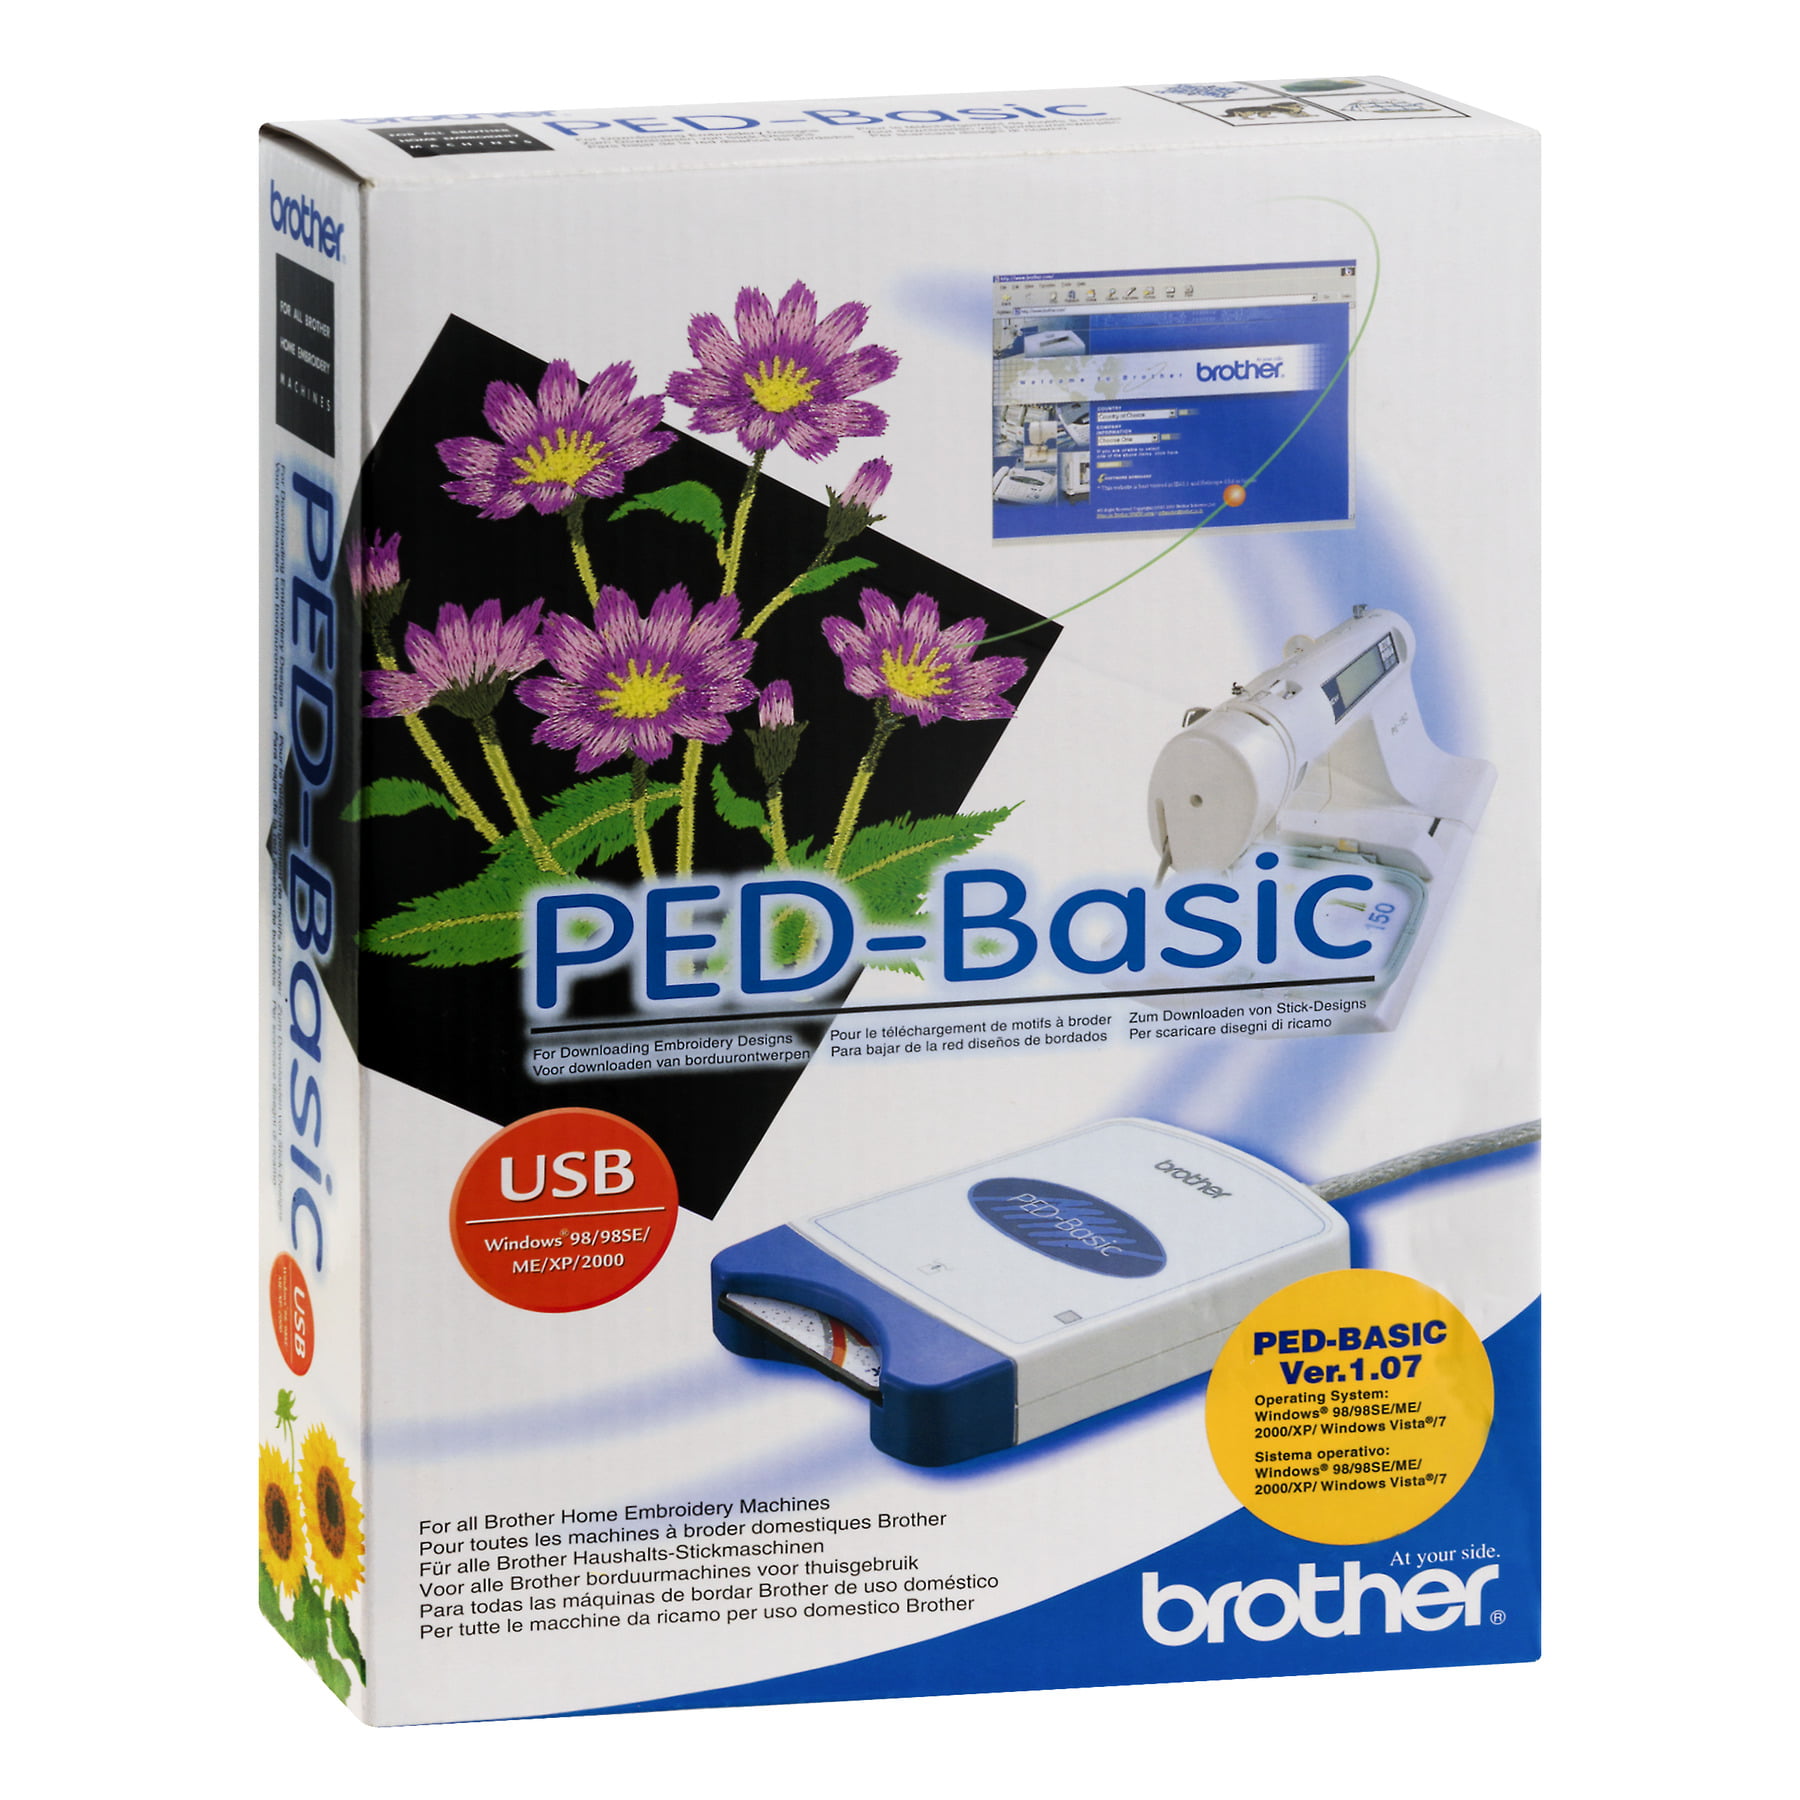 brother ped basic memory card purchase